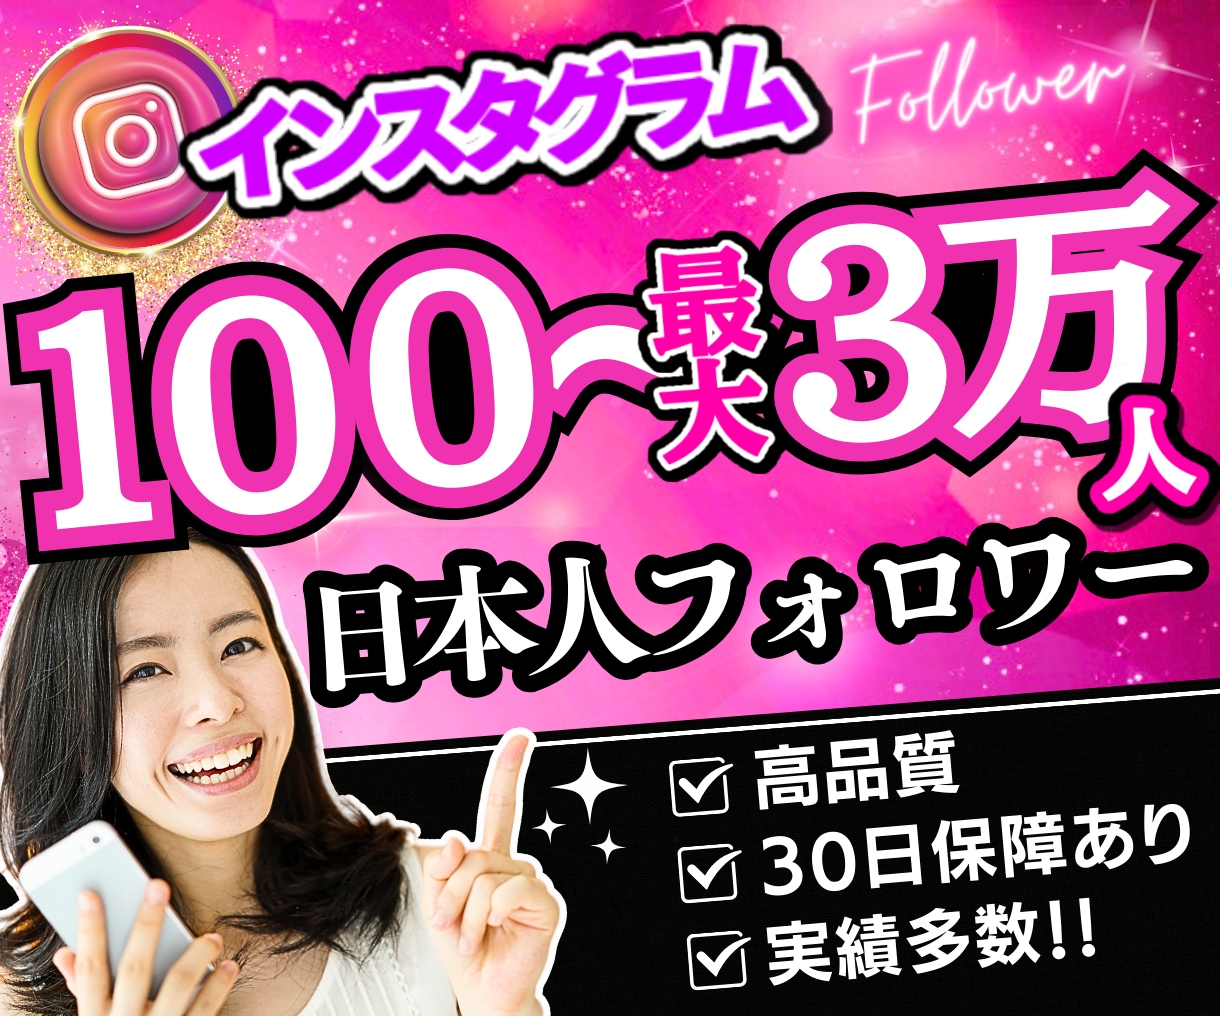 💬Coconara｜The most popular Instagram high-quality Japanese followers will increase SNS★GROW SERVICE｜Kanon 4.9…